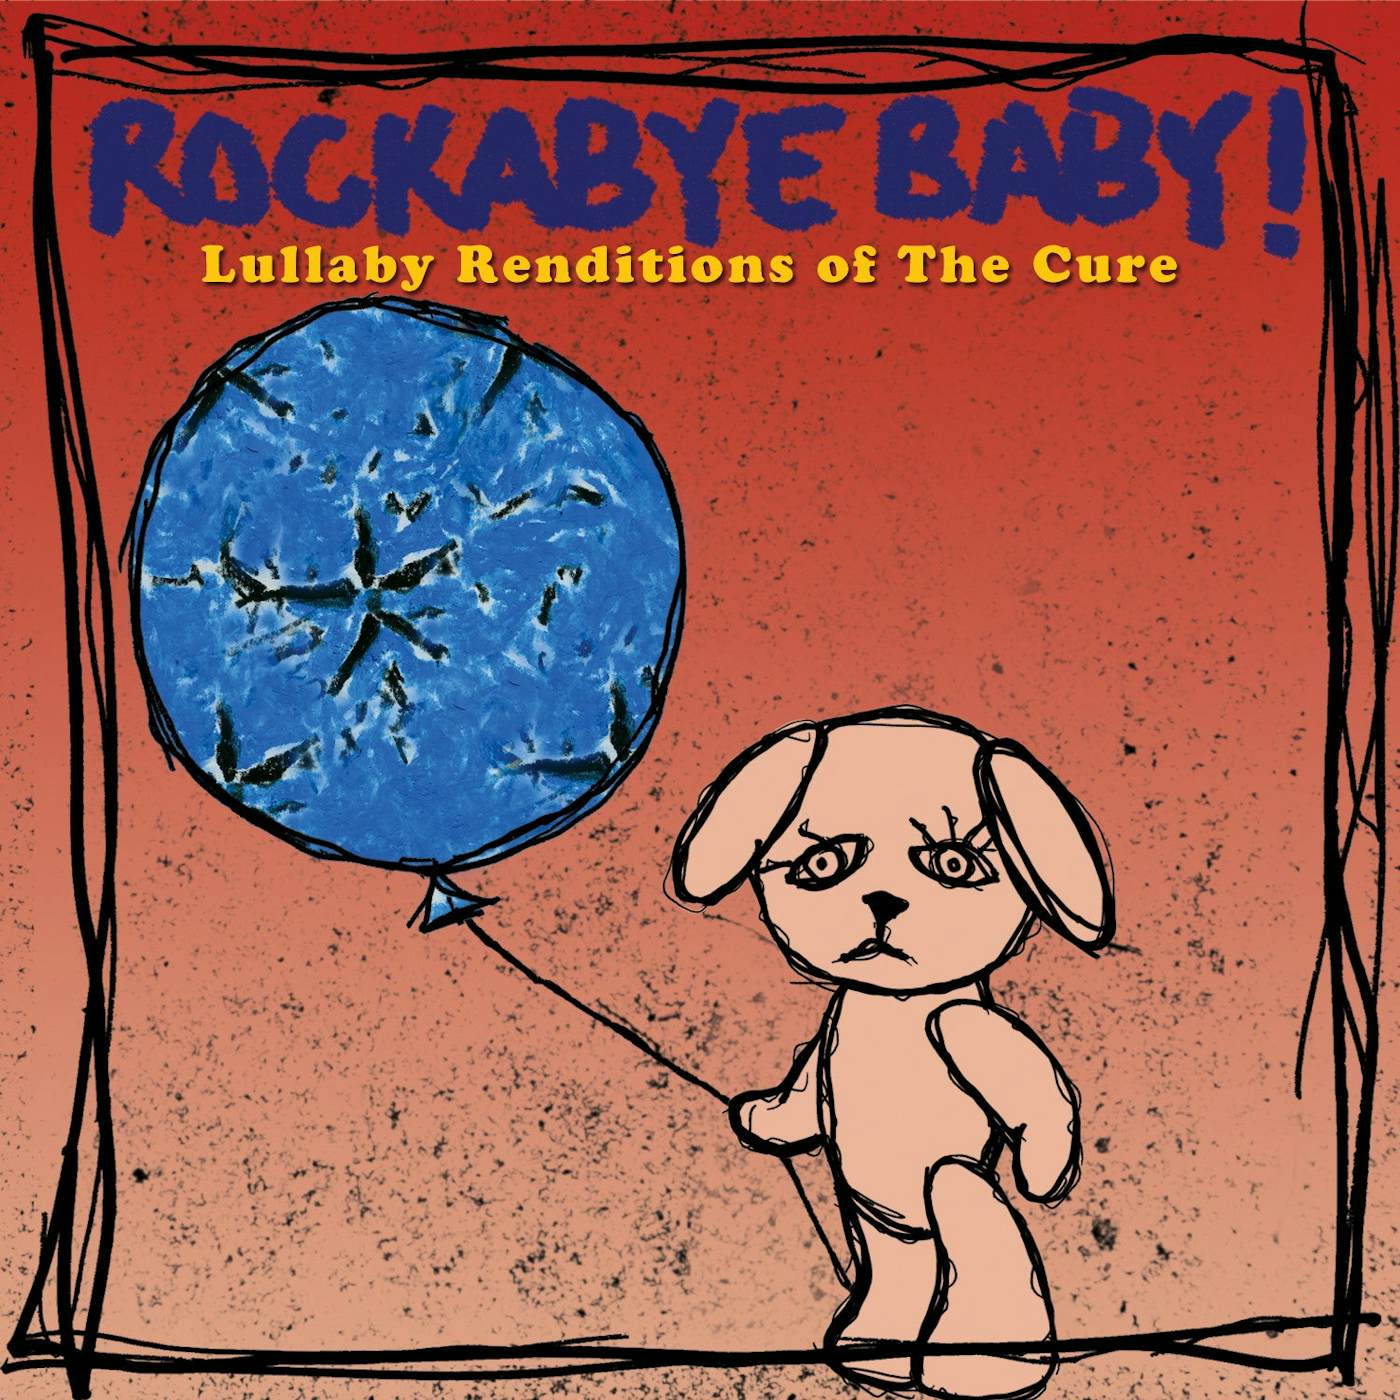 Rockabye Baby! Lullaby Renditions of The Cure